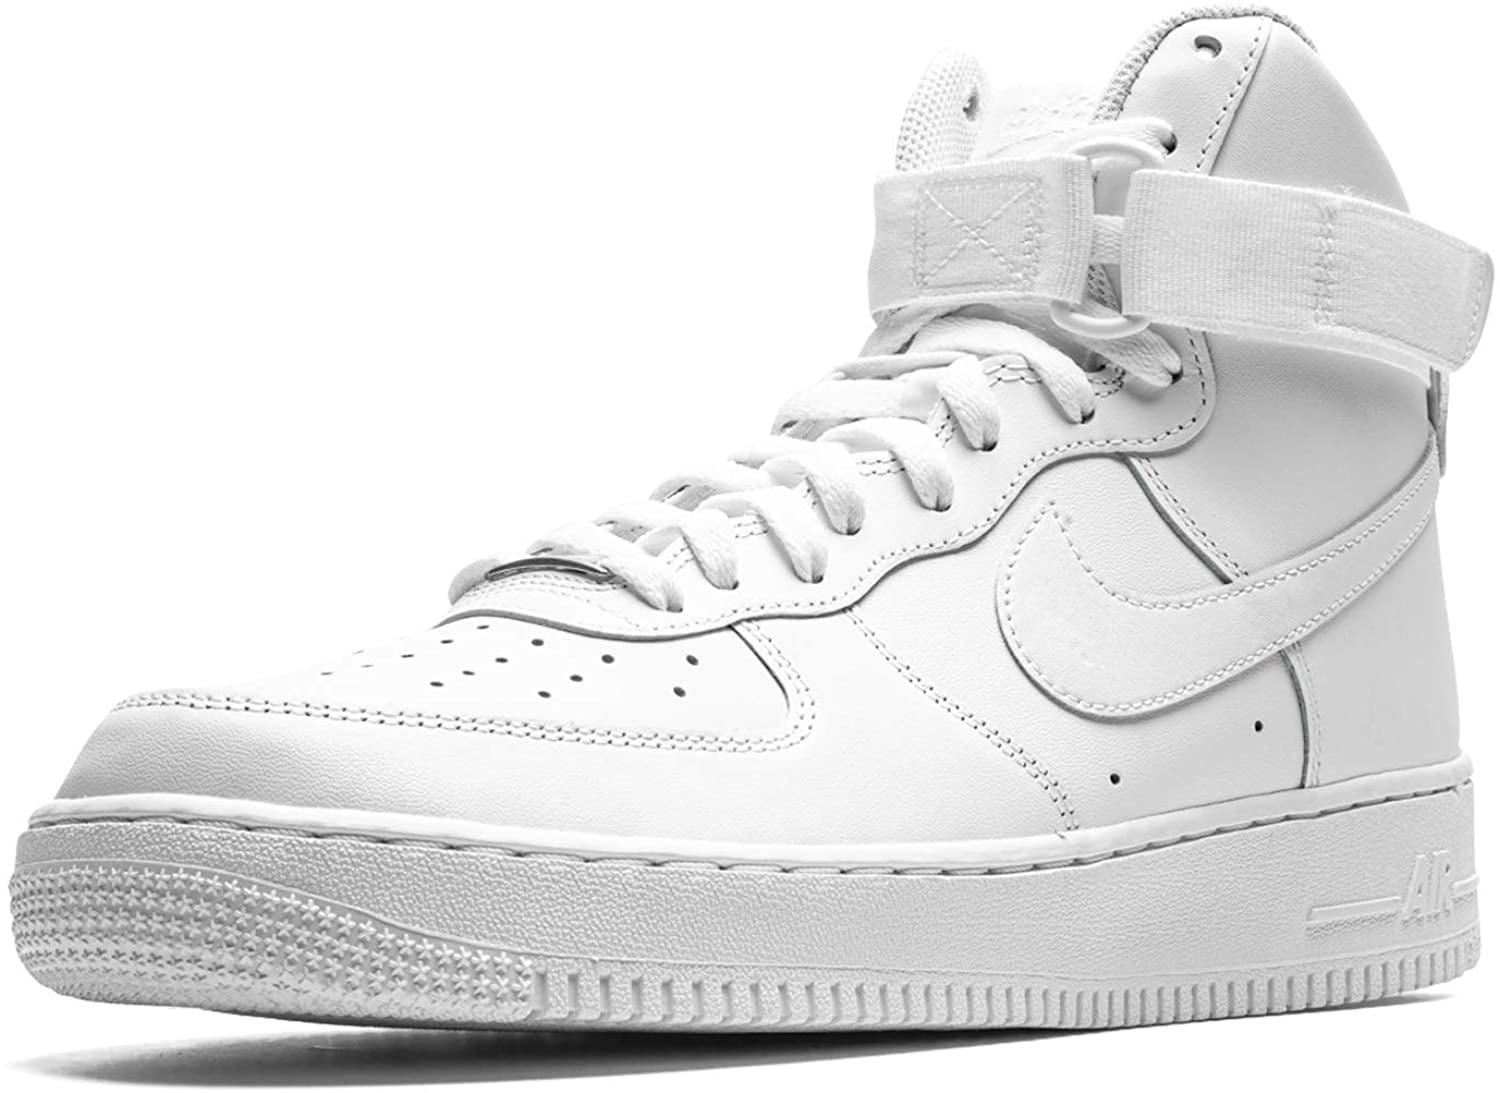 Nike AIR Force 1 high 07 Men's Sneaker CW2290 111 size 15 New with out ...